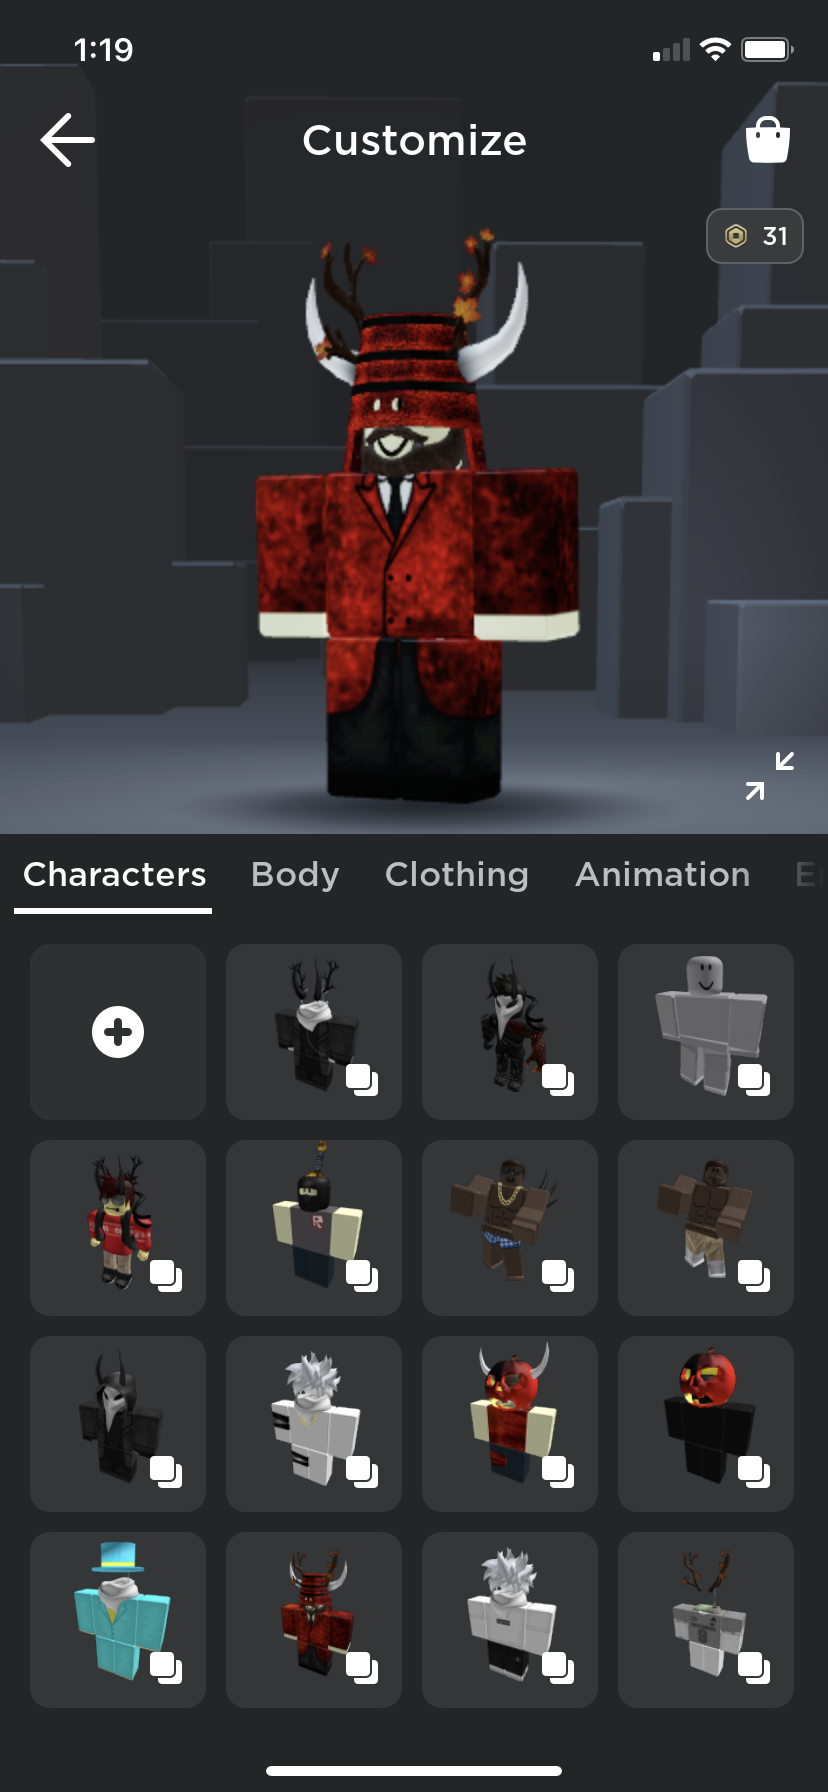 Trading - Trading 43 MM2 Godlys for a good roblox account or idv account -  EpicNPC